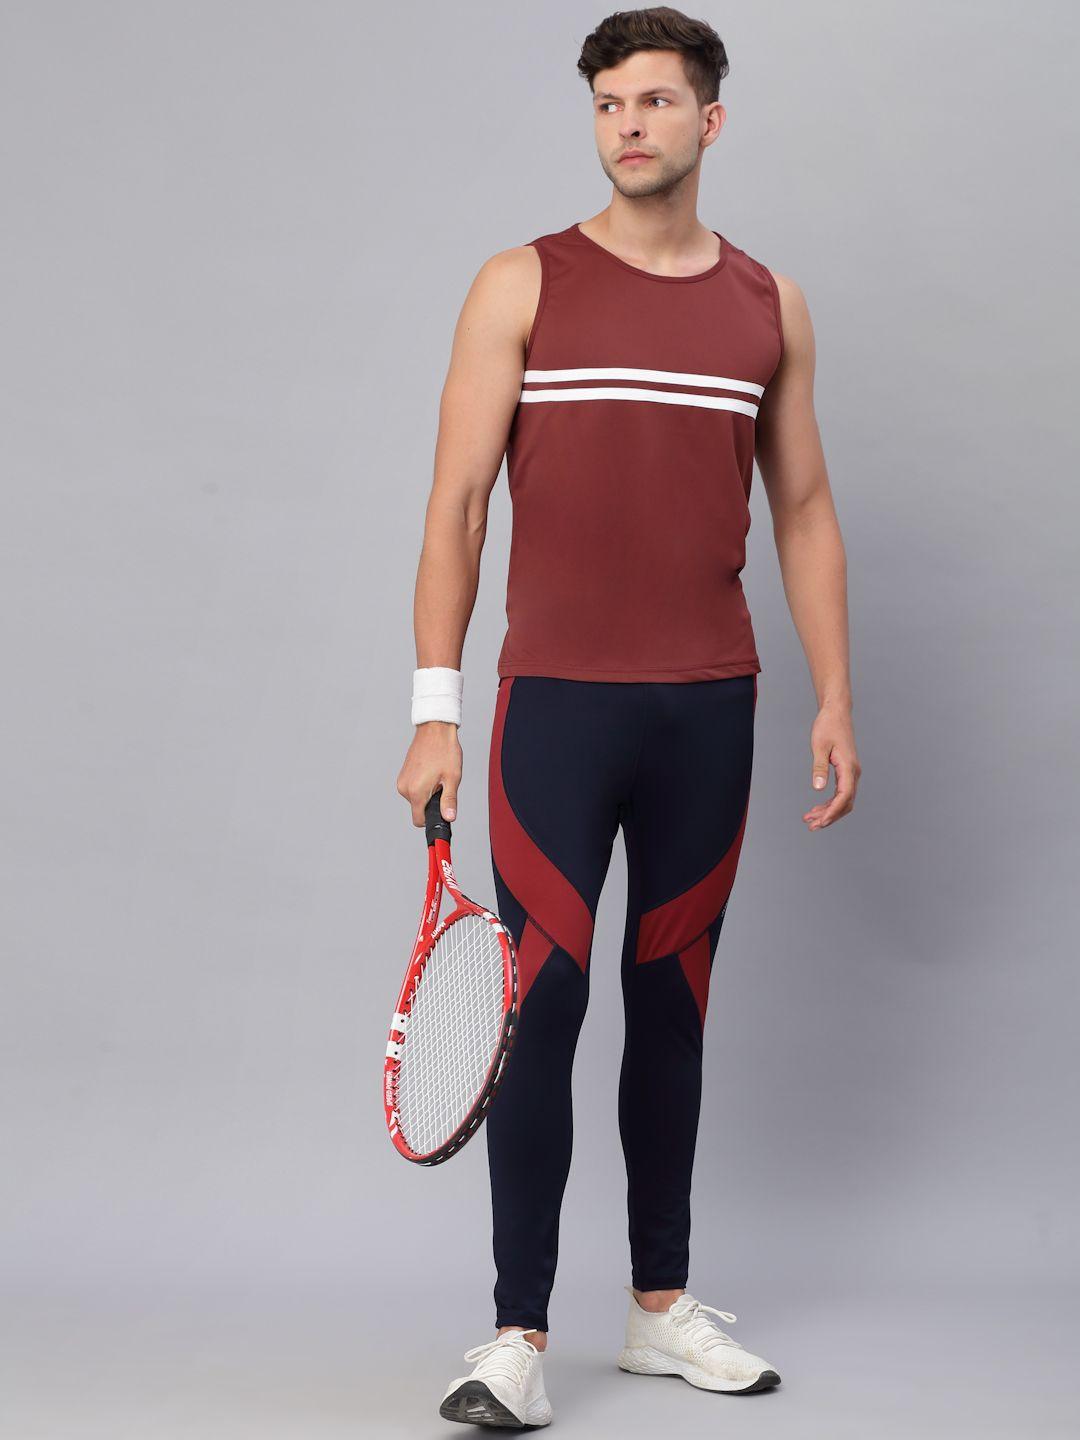 jump usa men navy blue & maroon rapid dry-fit antimicrobial running tights